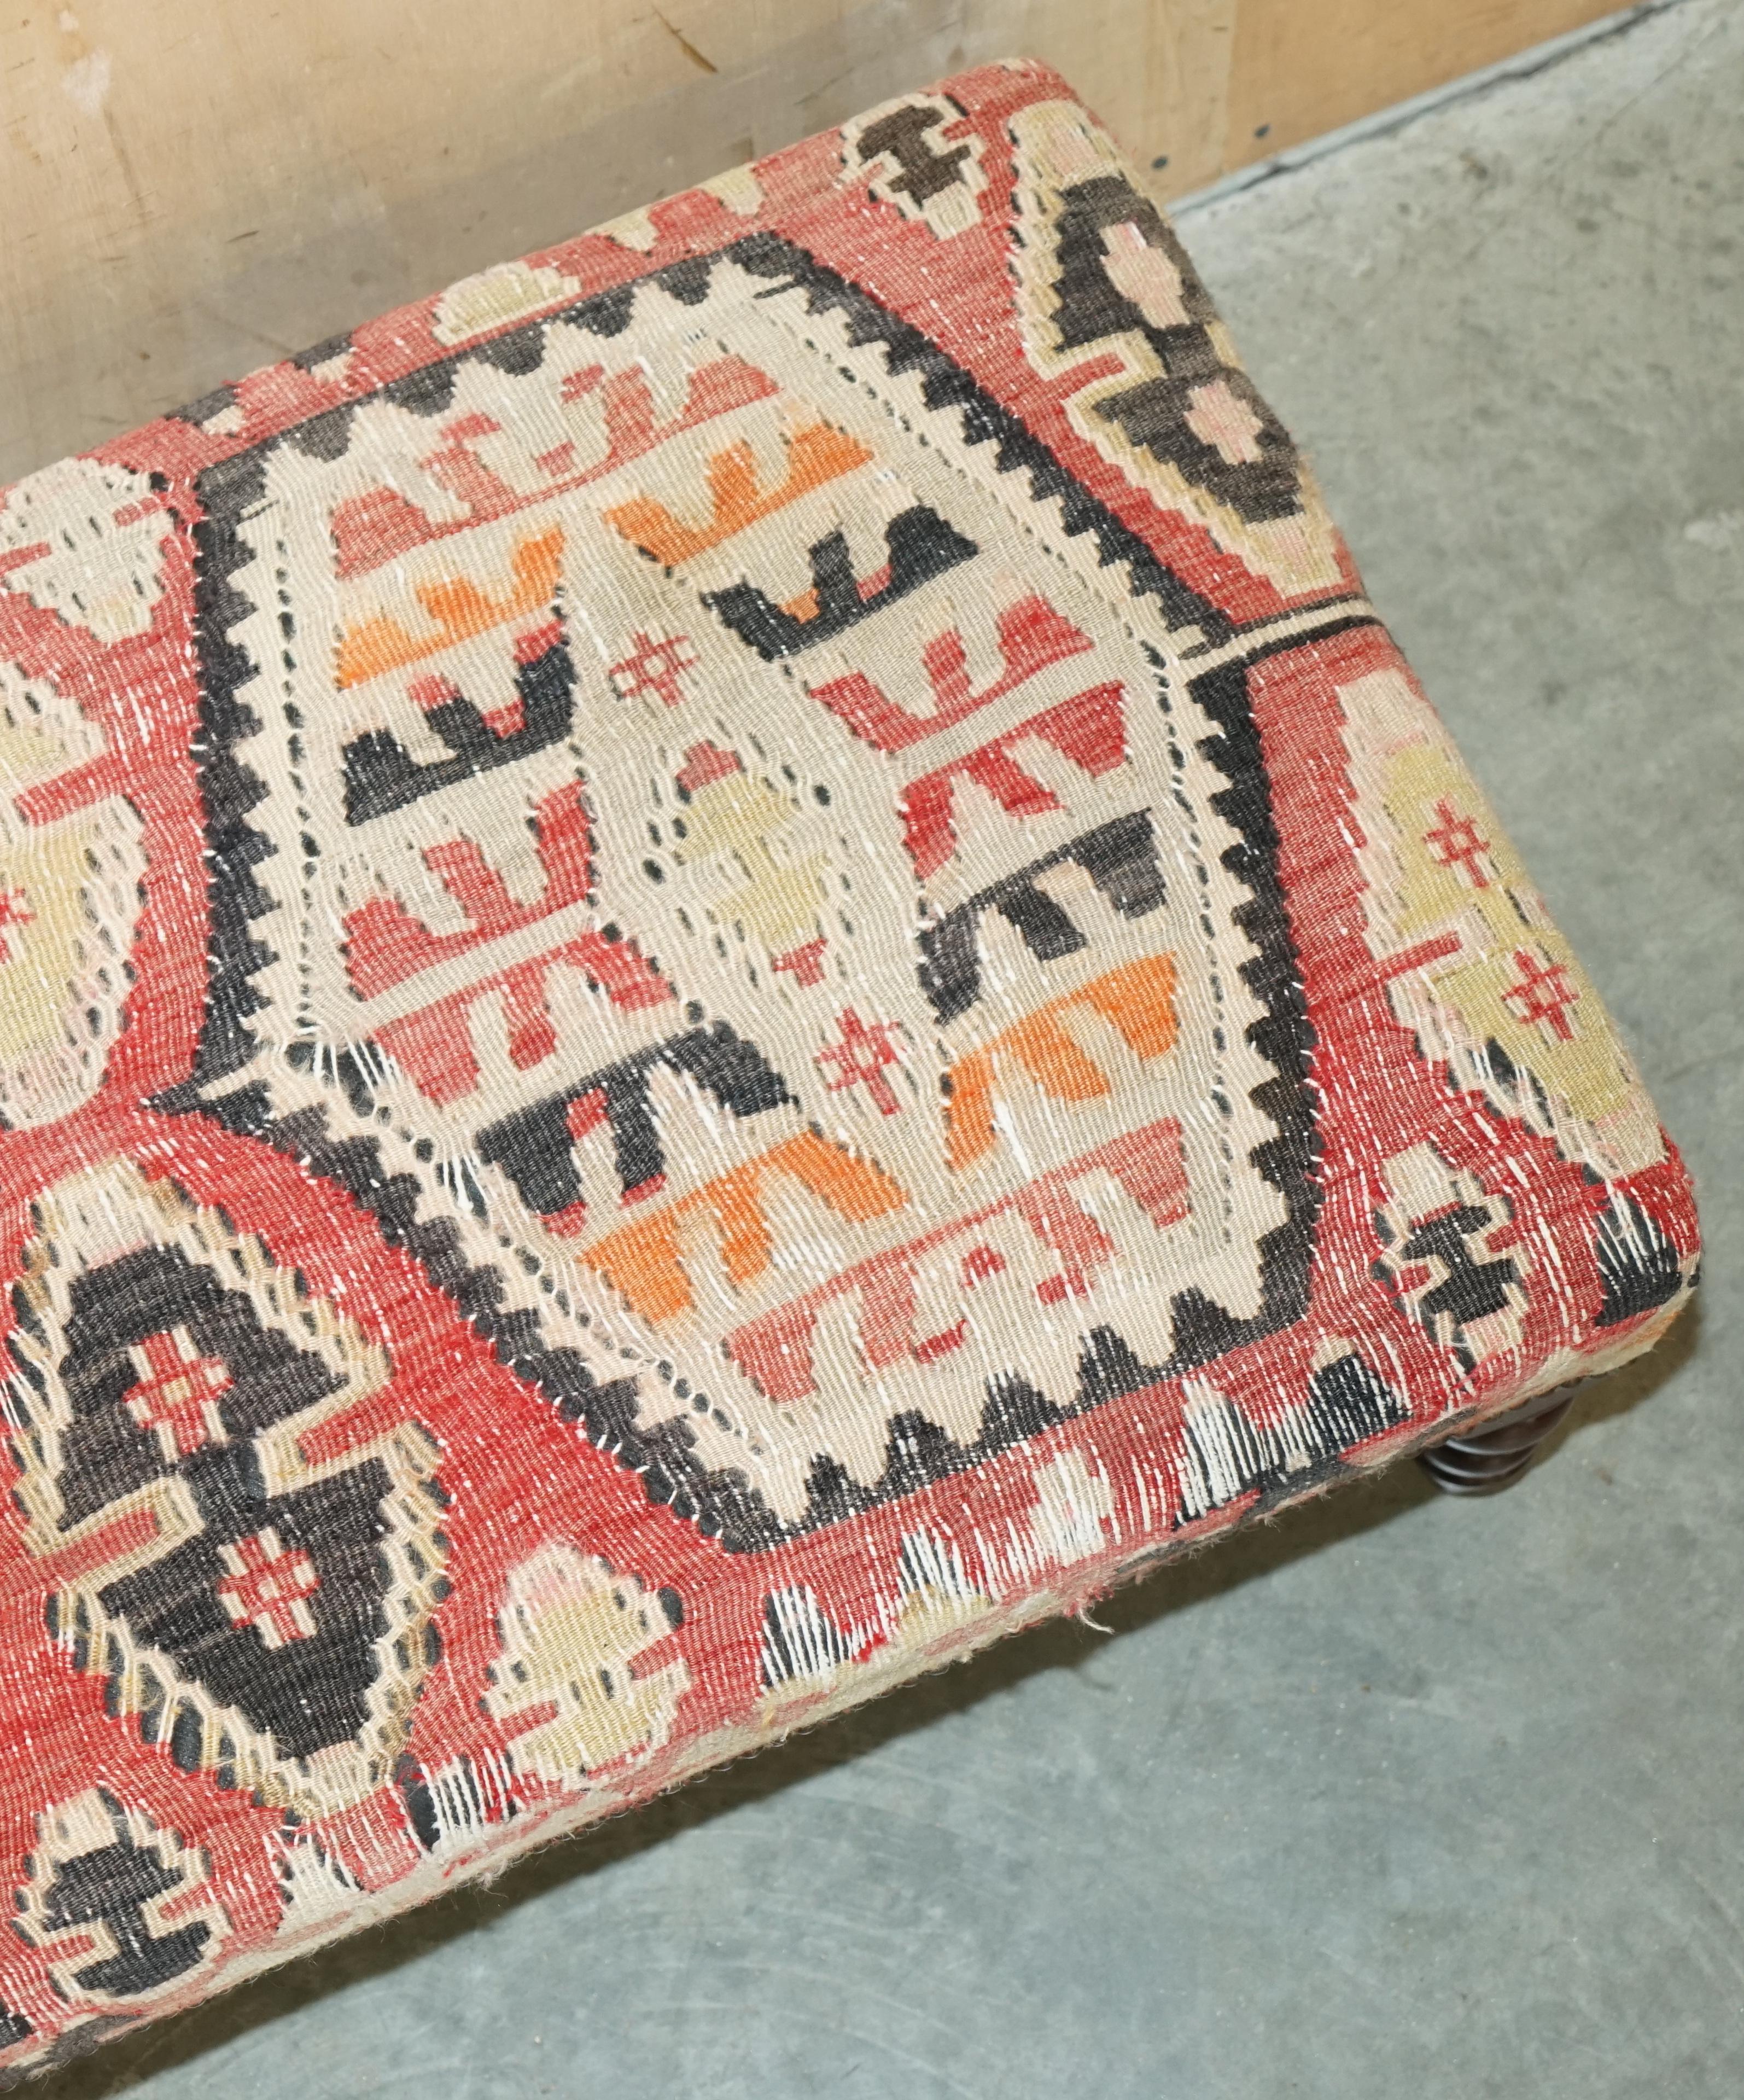 STUNNING AND COLLECTABLE ViNTAGE GEORGE SMITH CHELSEA KILIM FOOTSTOOL OTTOMAN 5